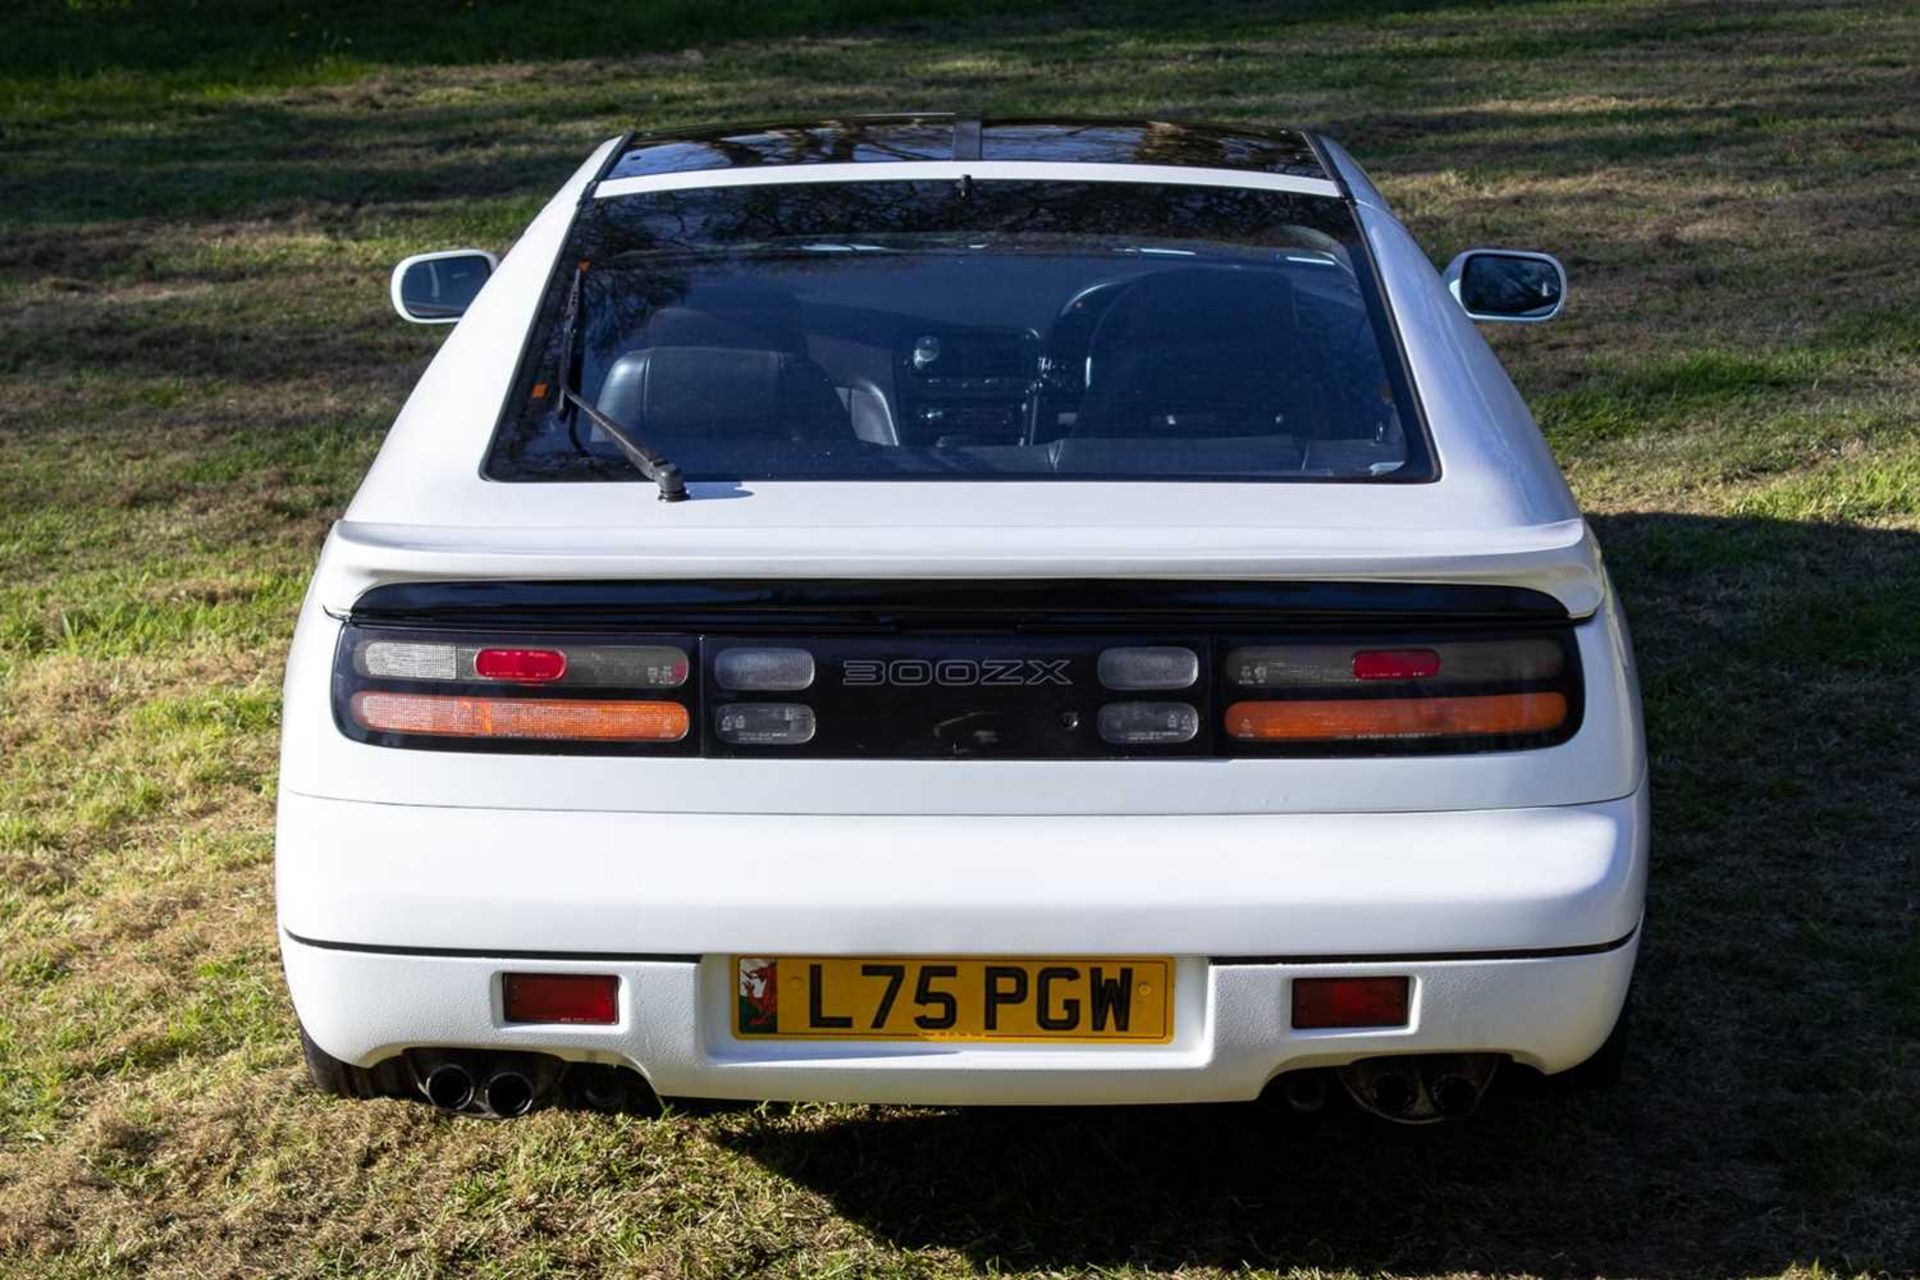 1990 Nissan 300ZX Turbo 2+2 Targa One of the last examples registered in the UK - Image 11 of 89